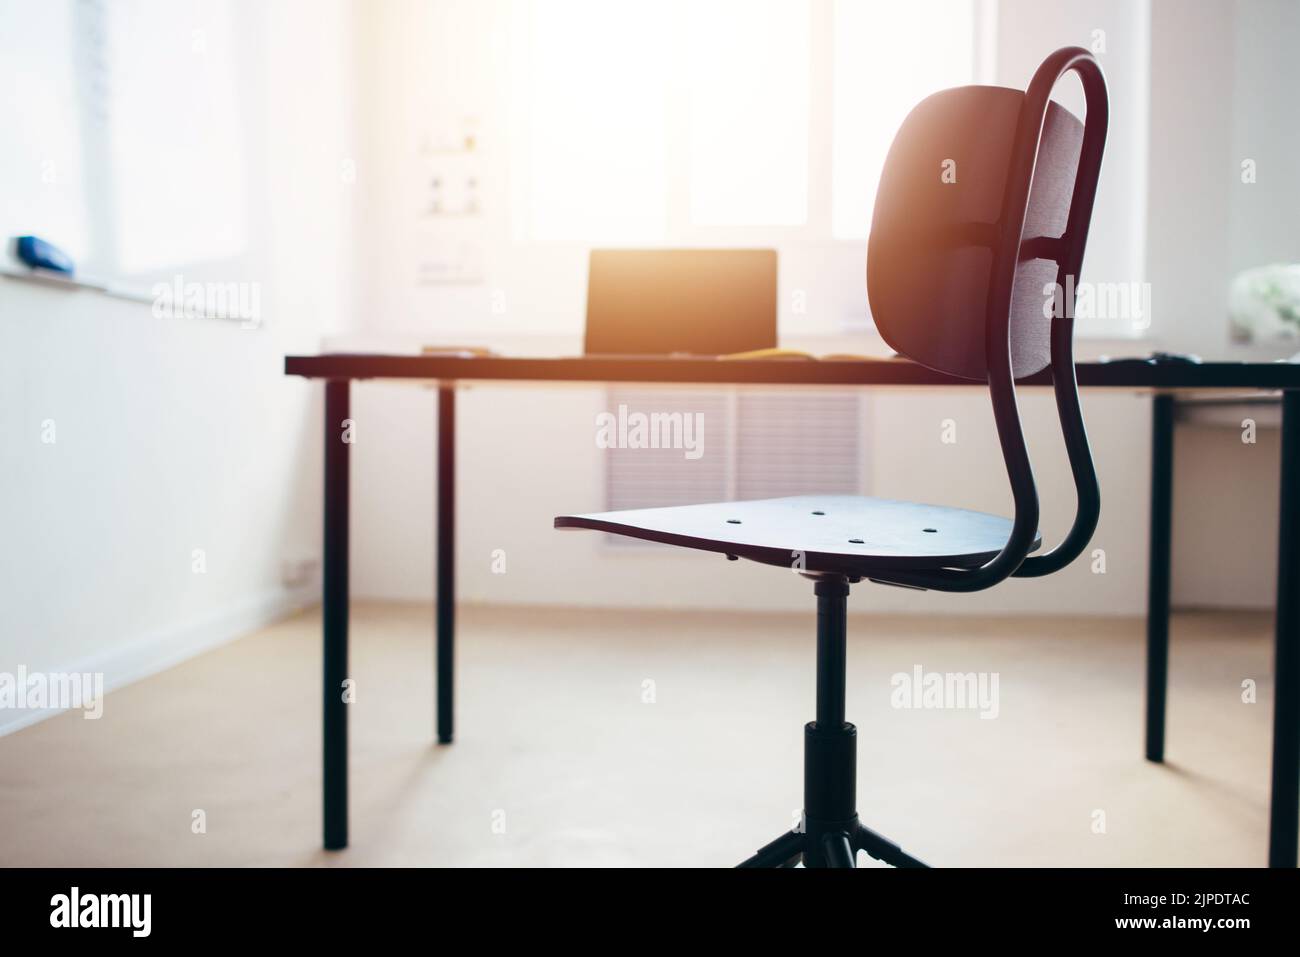 Empty work space chair, desk with laptop. Stock Photo